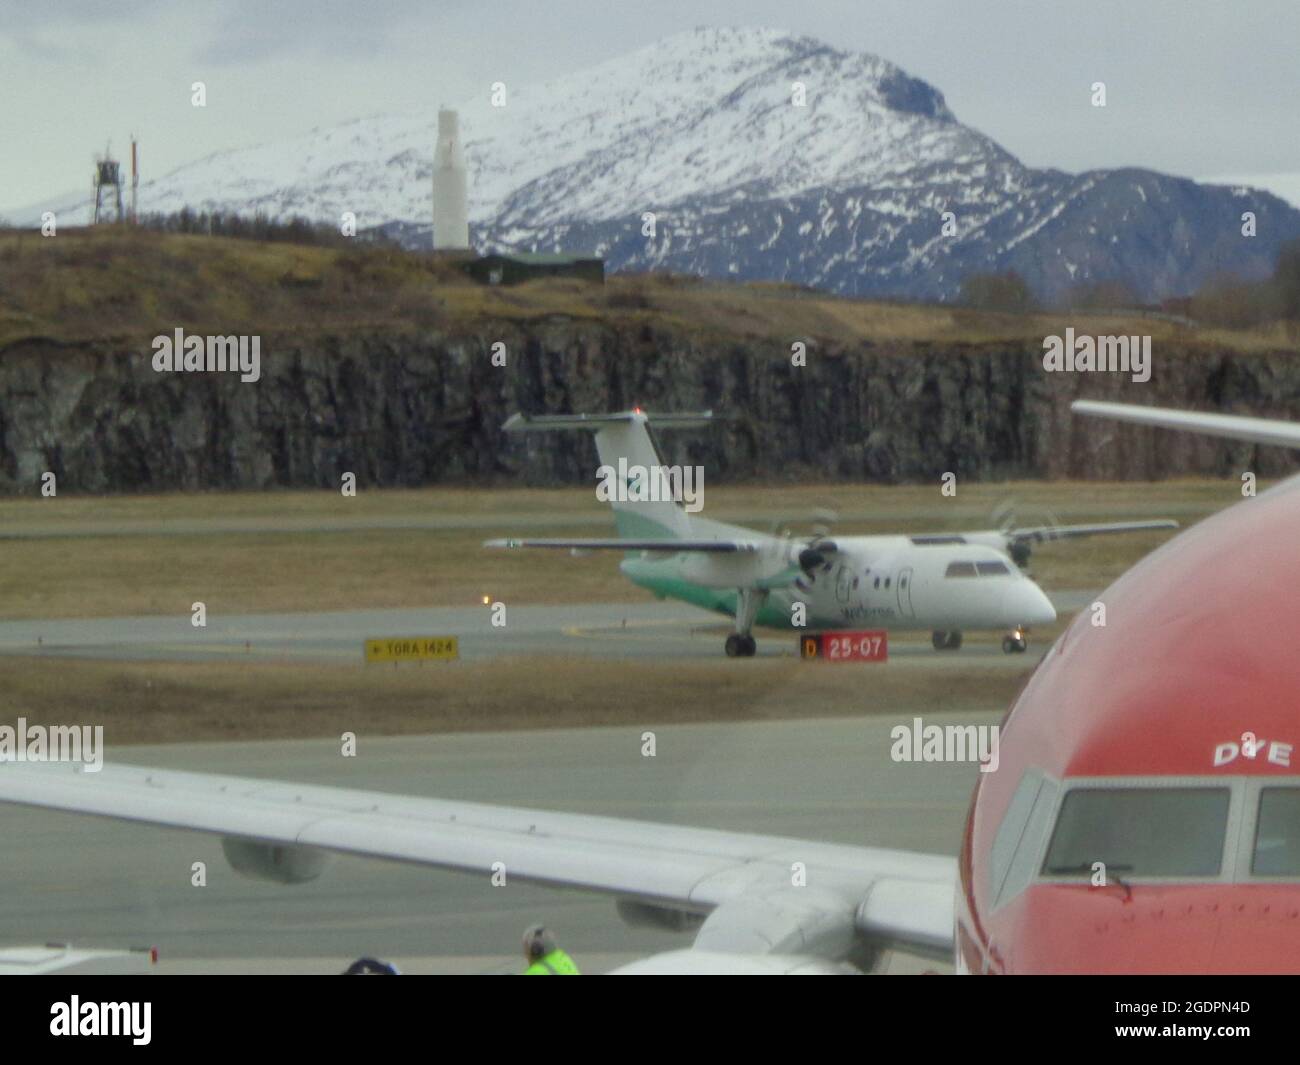 Longyearbyen, Norway - 05.04.2012: Norwegian aircraft at Svalbard airport Longyear (LYR) - northernmost airport in the world with public scheduled fli Stock Photo